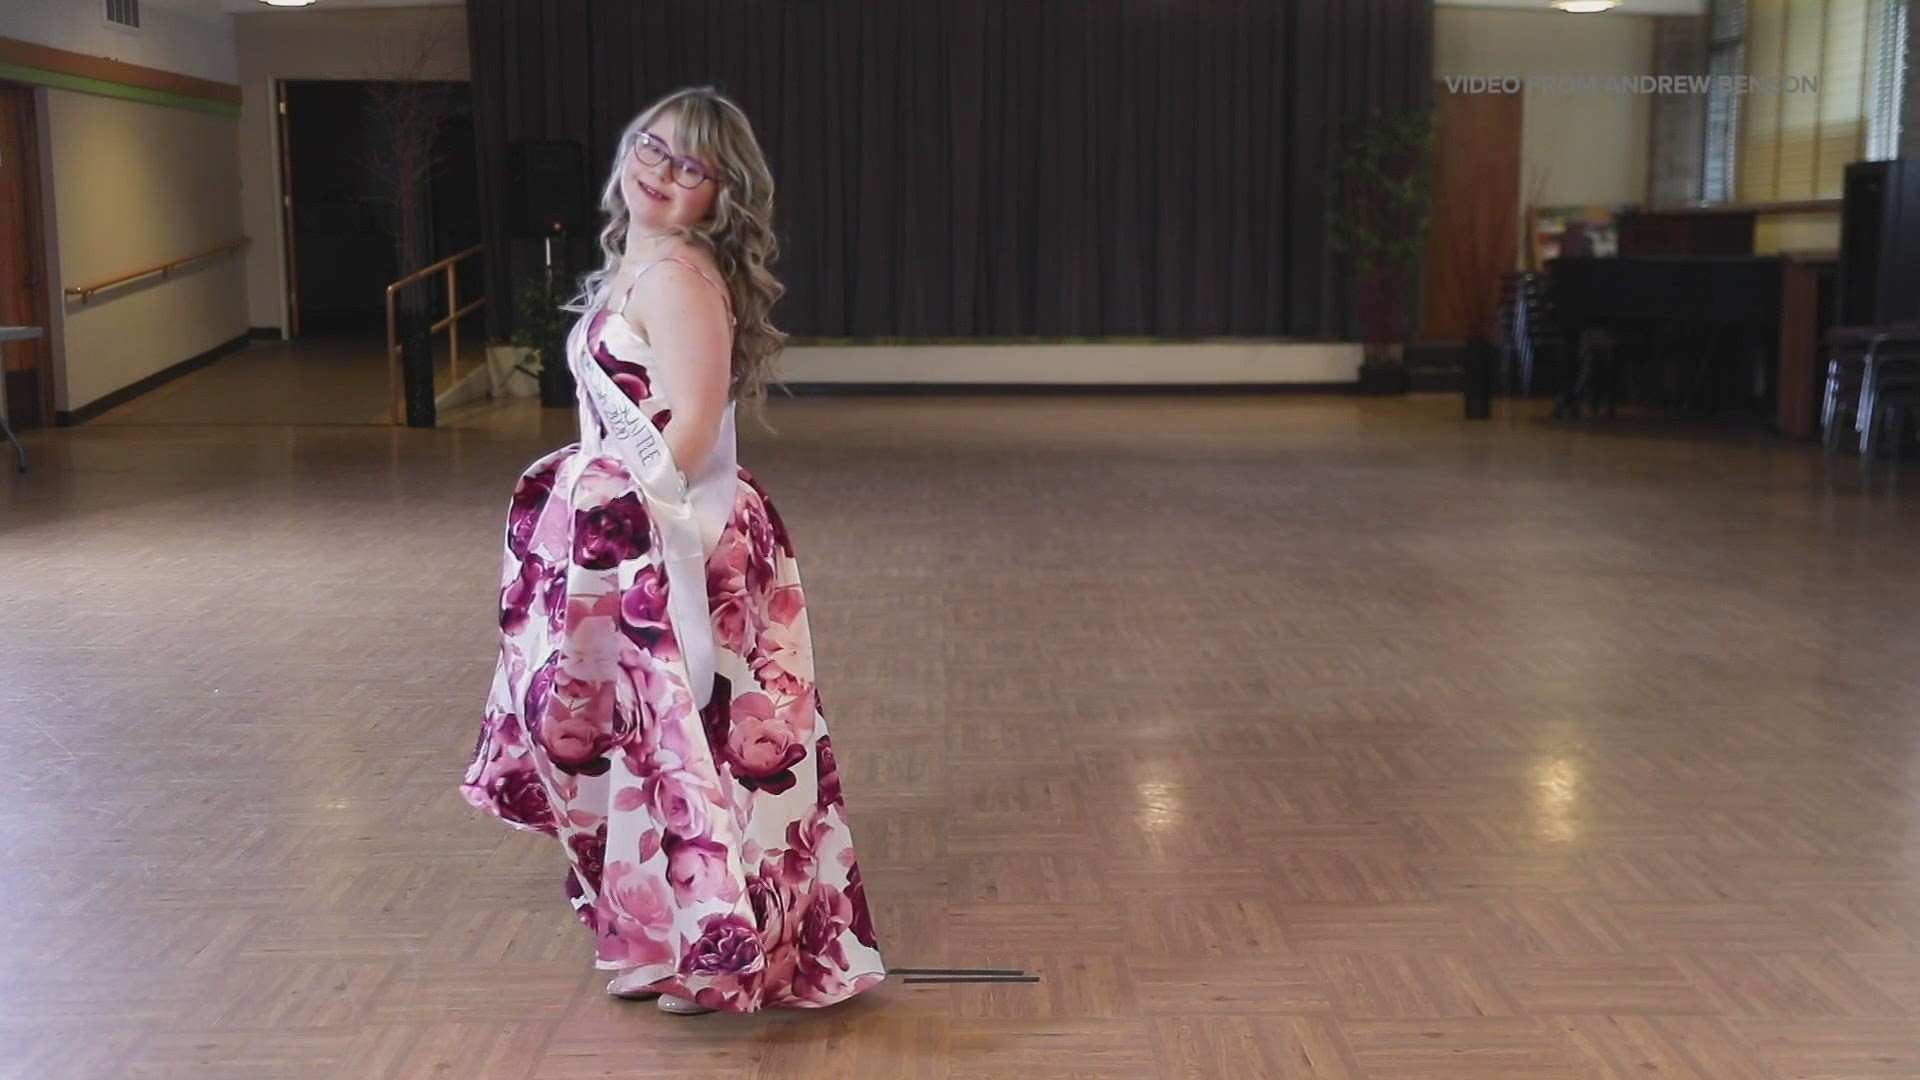 Raechel Benson is 17 and has Down syndrome, but she hasn't let that stop her from pursuing her passion for acting, singing and fashion design.